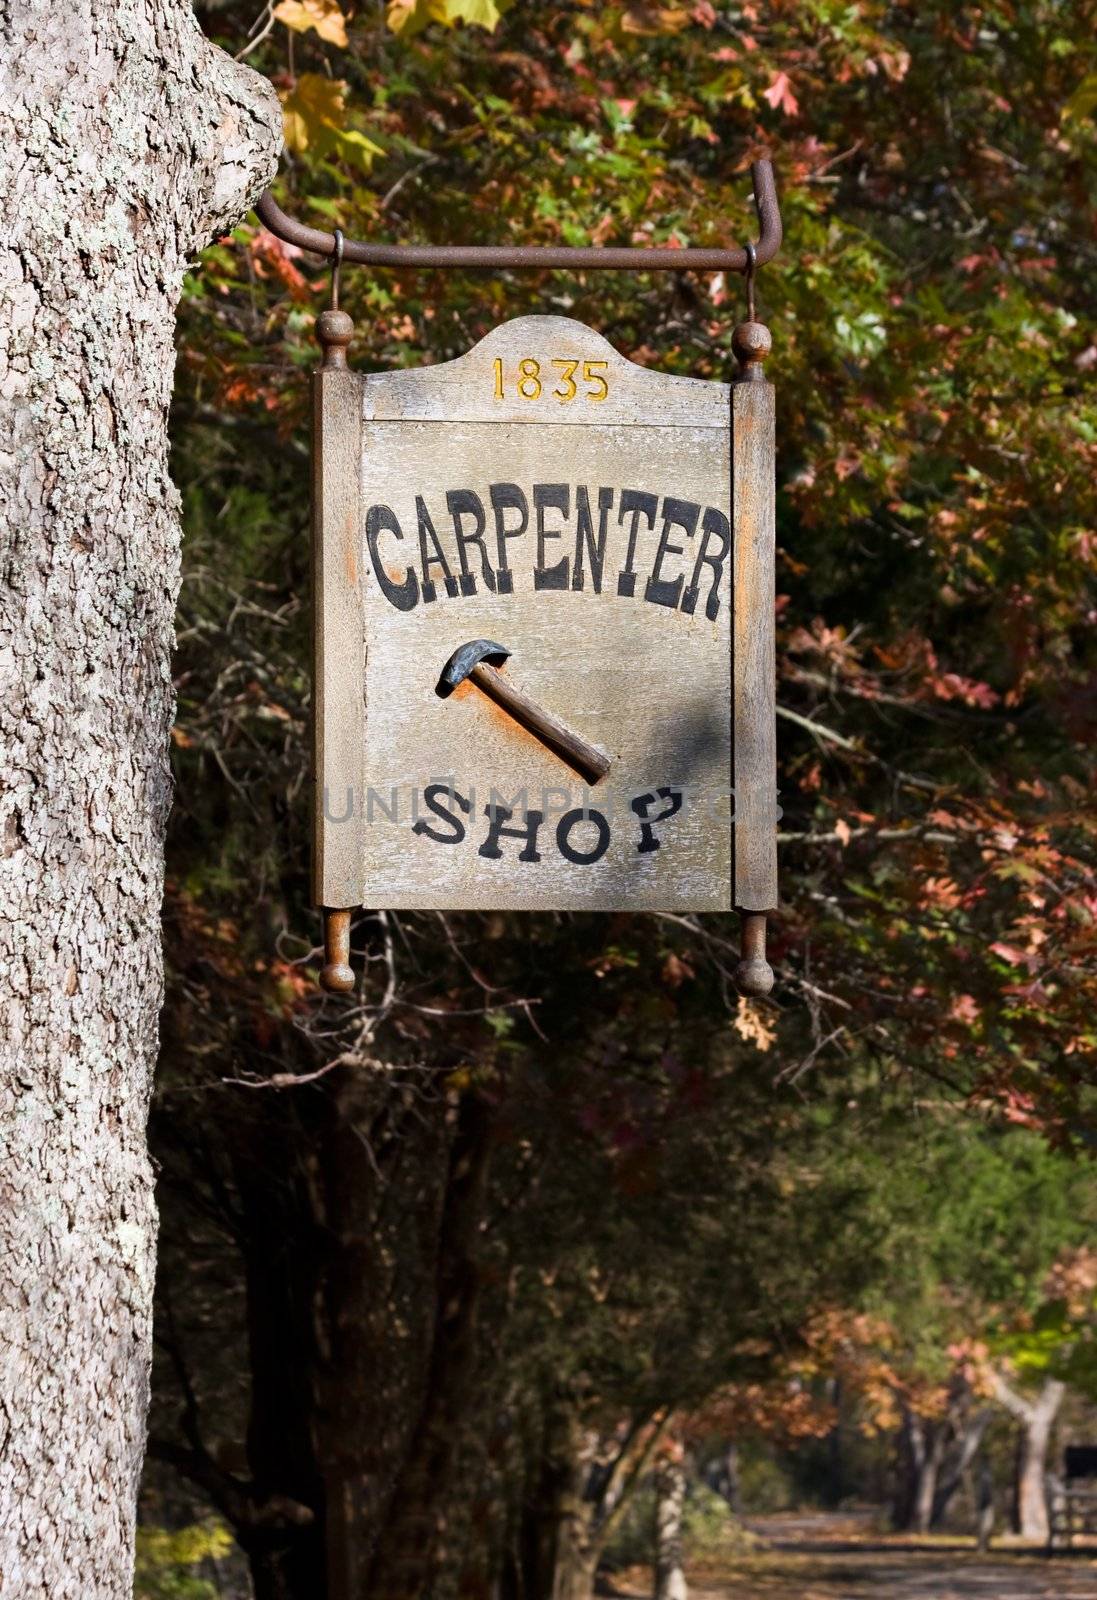 A carpenter shop sign at the carpenter shop in Allaire Village, New Jersey. Allaire village was a bog iron industry town in New Jersey during the early 19th century. 